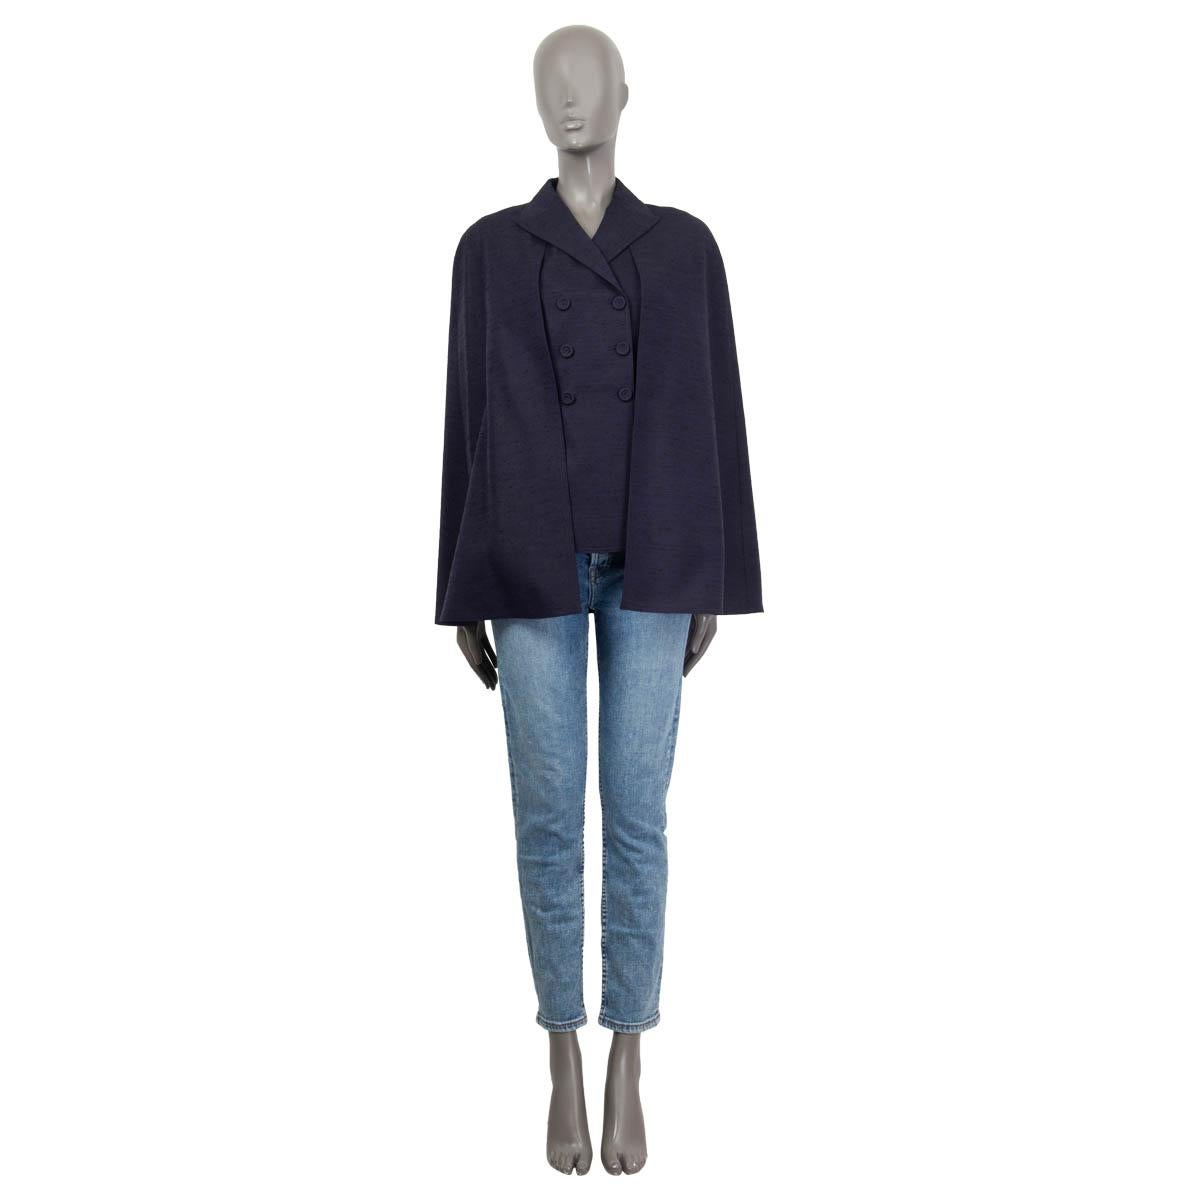 100% authentic Christian Dior Cruise 2020 'Shantung' double breasted blazer cape in navy blue cotton (57%) and viscose (43%). Features two slit pockets on the front. Opens with five buttons on the front. Lined in navy blue silk (100%). Brand new,